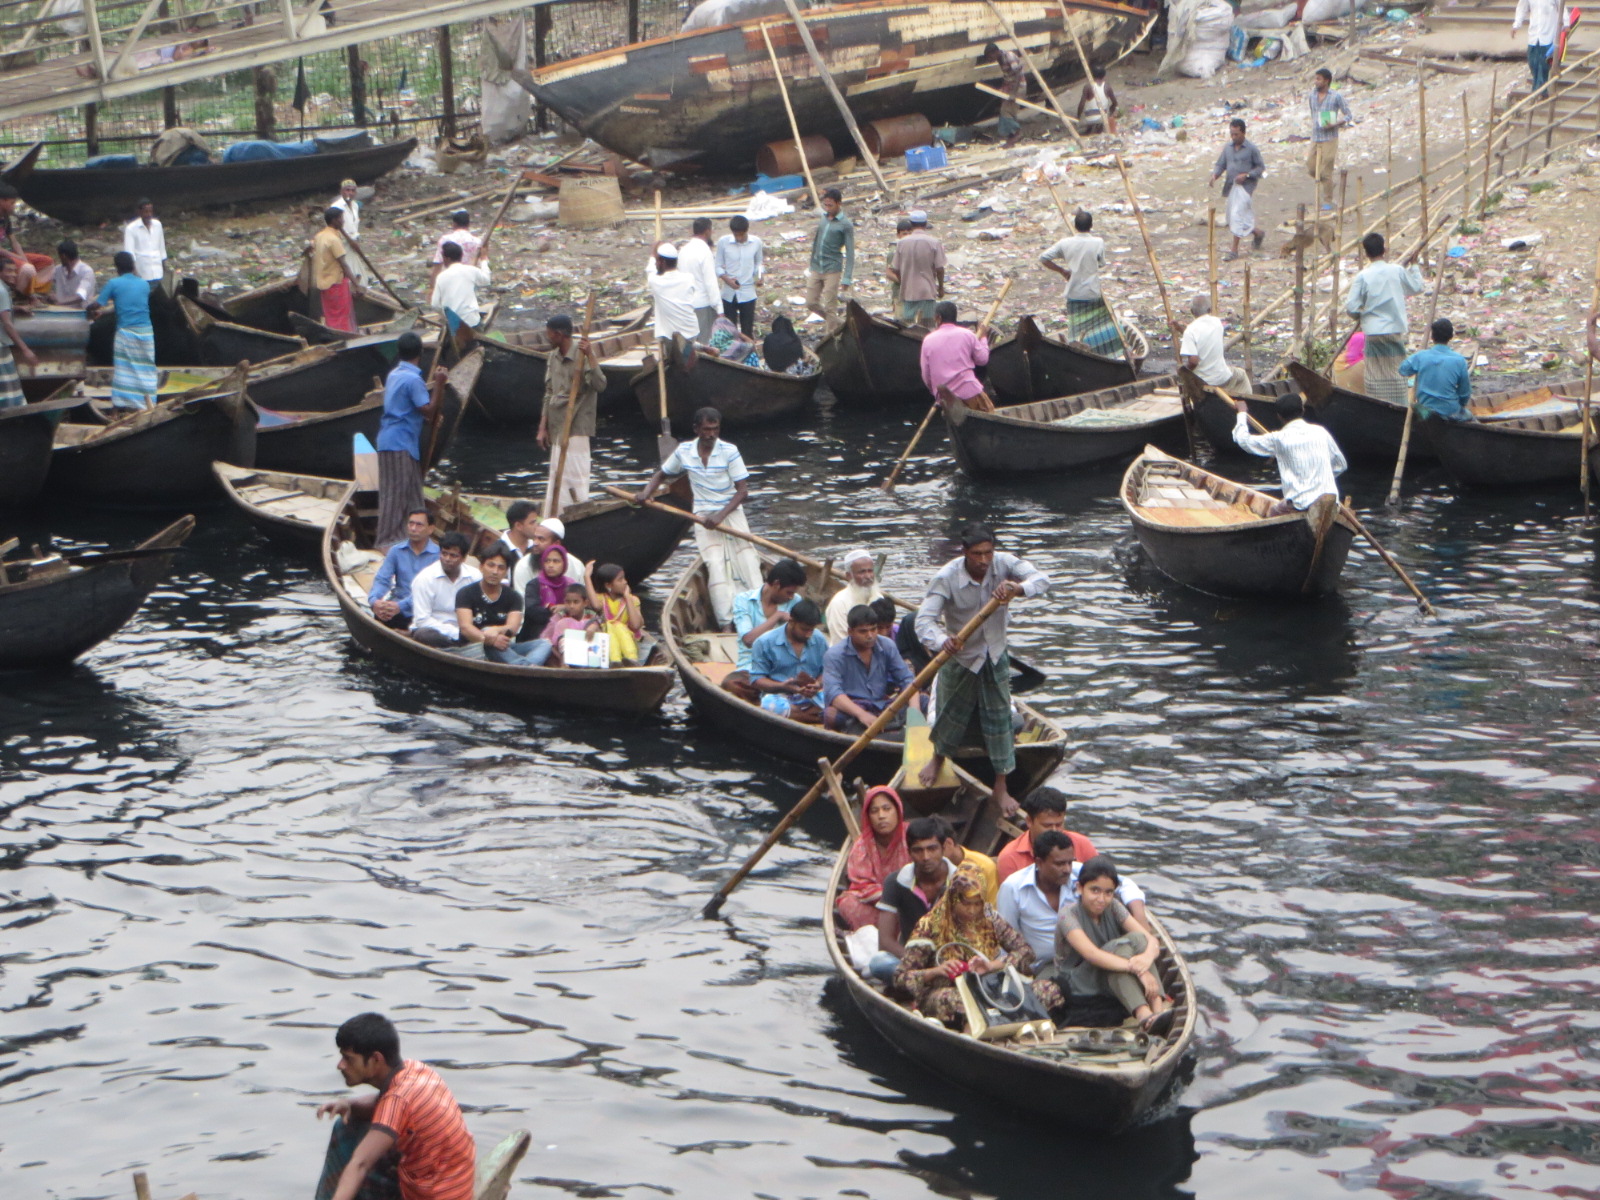 The rubbish strewn river banks of Dhaka and black water indicate that some work remains with the environment.